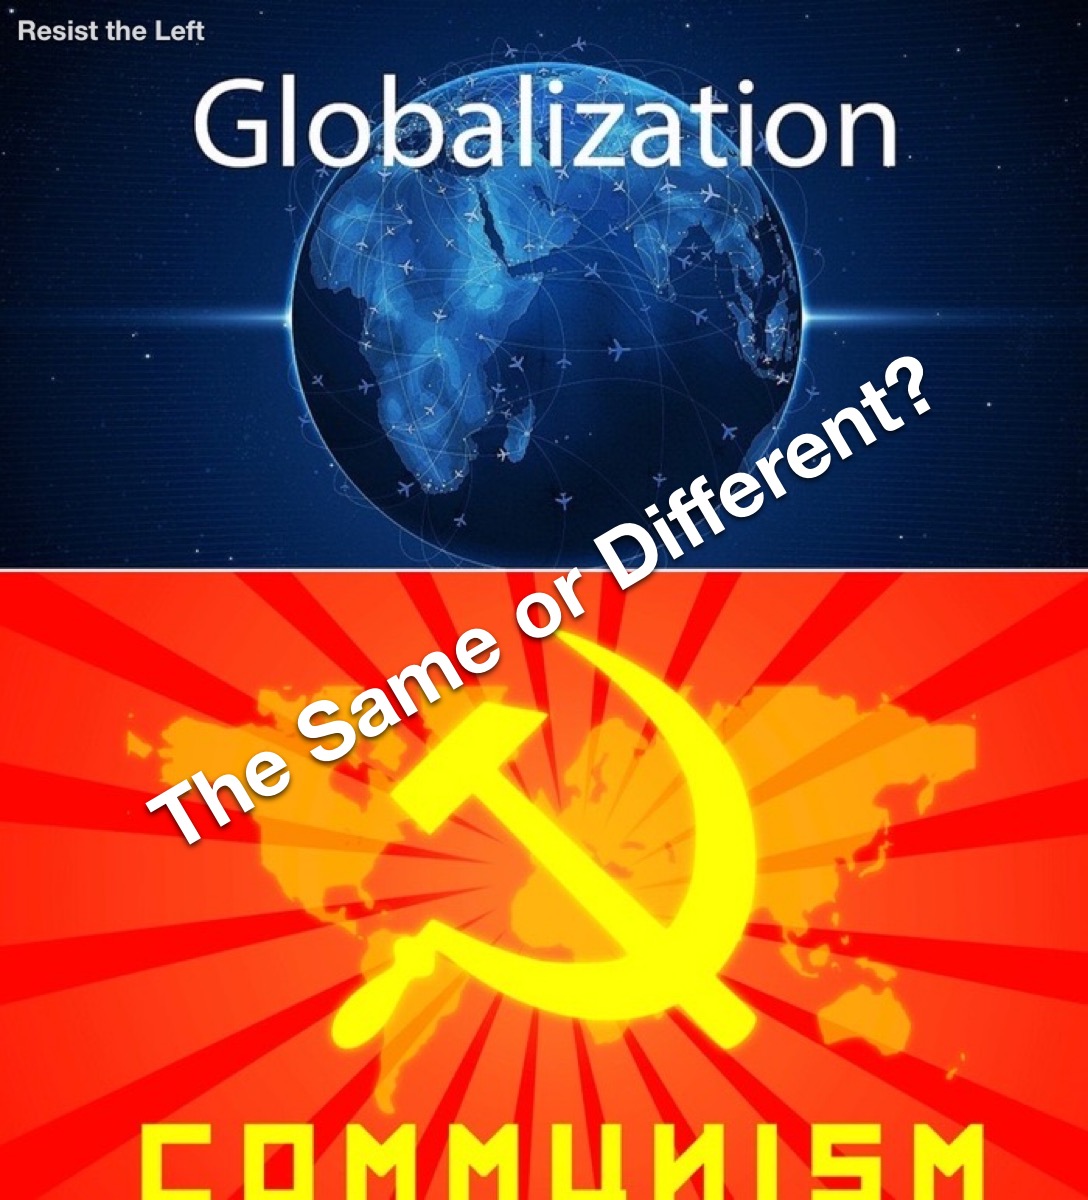  What are the differences between Globalism and Communism?